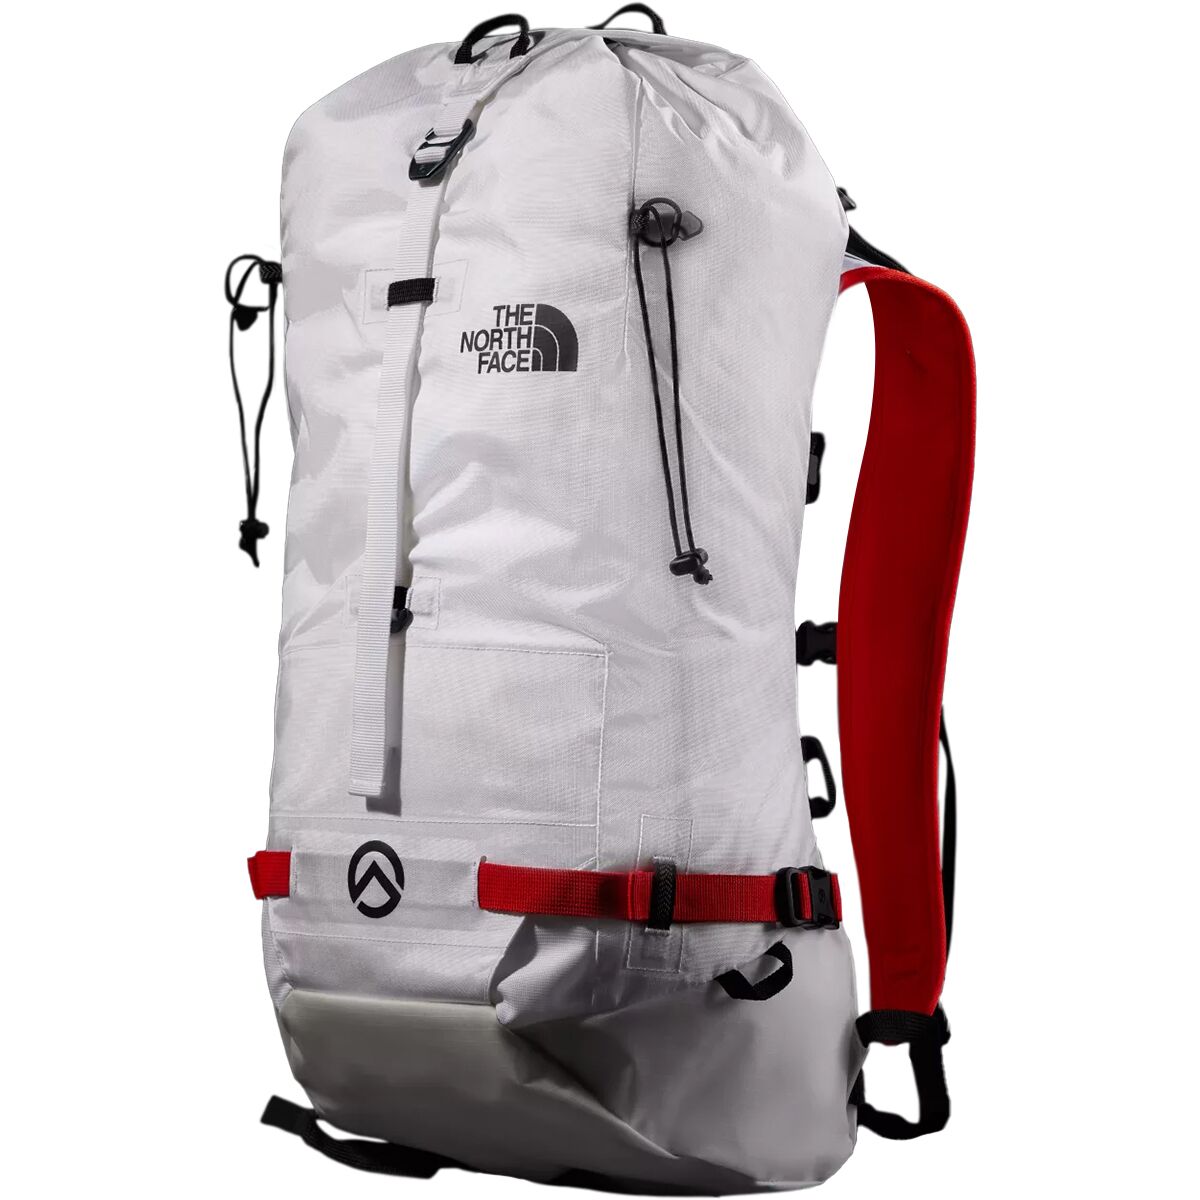 The North Face Verto 27L Backpack